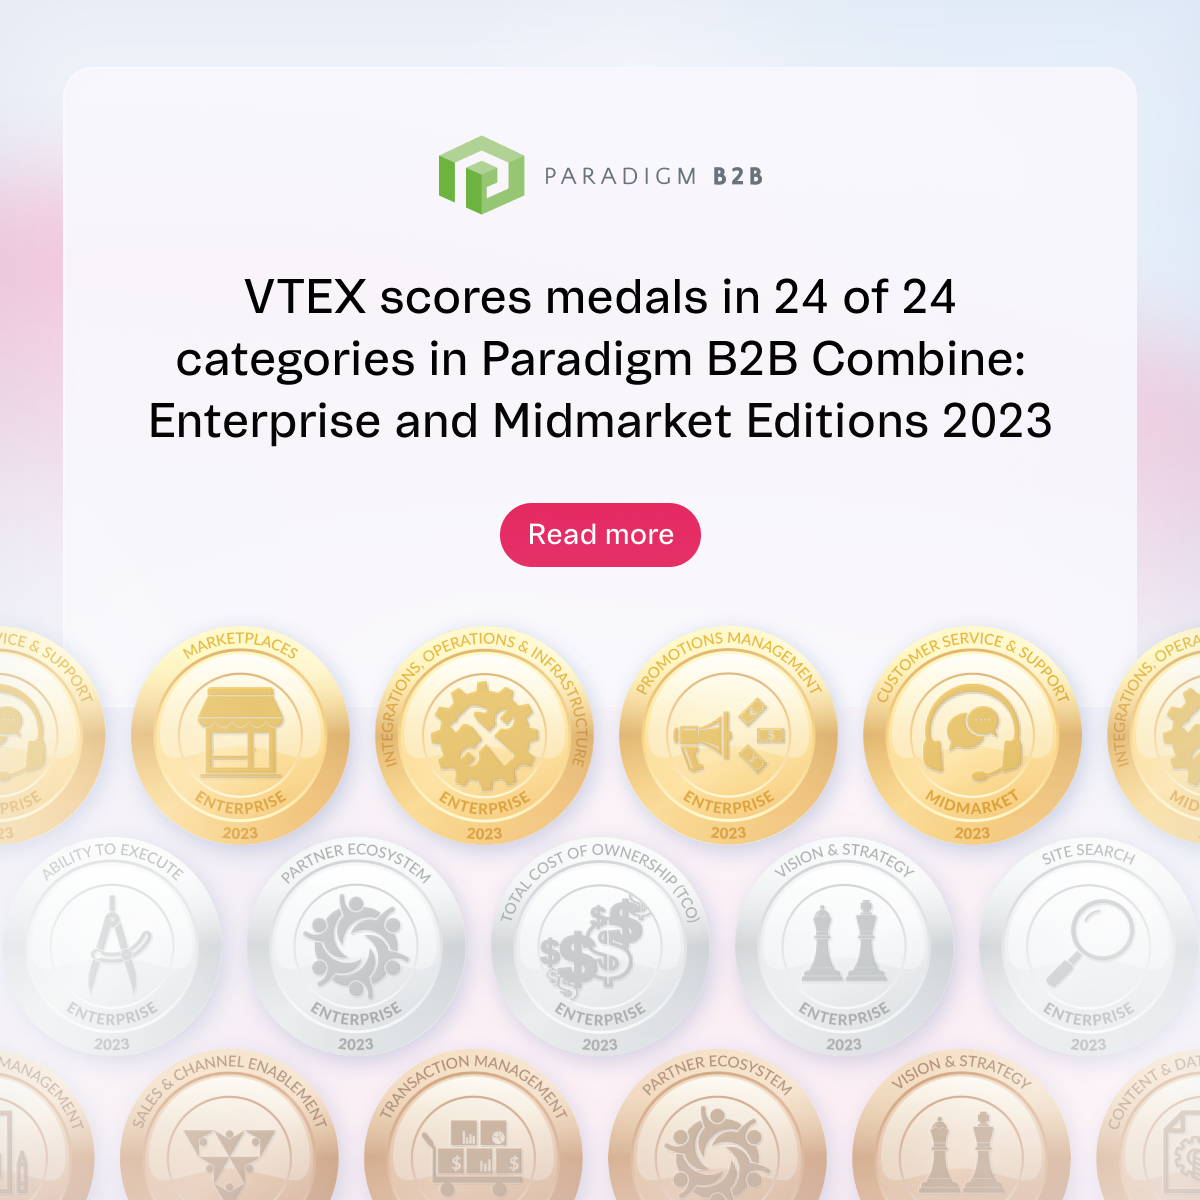 VTEX Awarded Medals in All 24 Categories for the 2023 Paradigm B2B Combine for Digital Commerce Solutions: Enterprise and Midmarket Editions